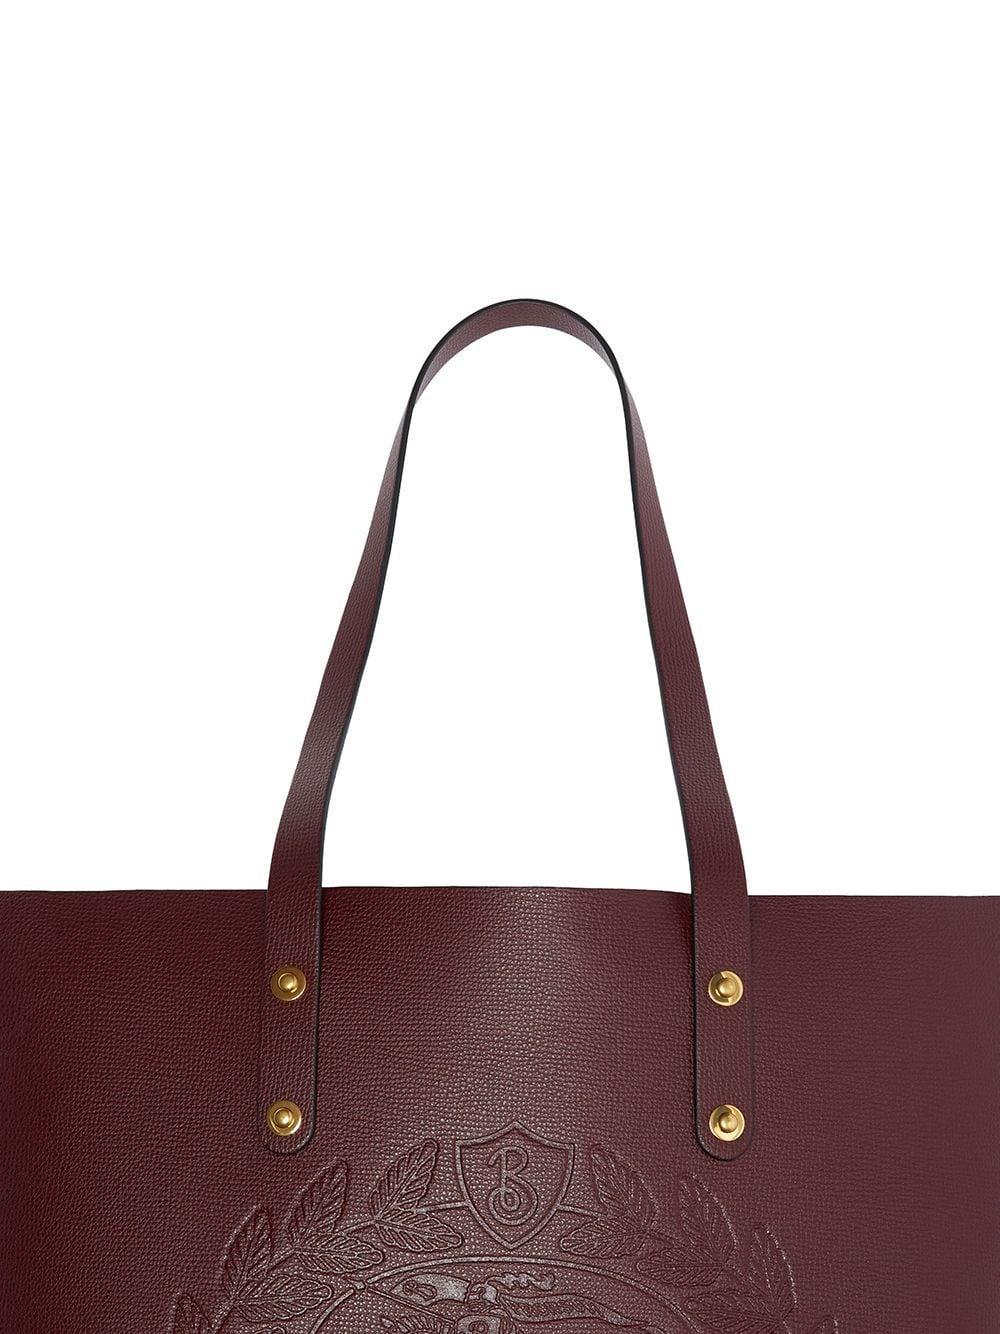 Burberry Small Embossed Crest Leather Tote in Red - Lyst